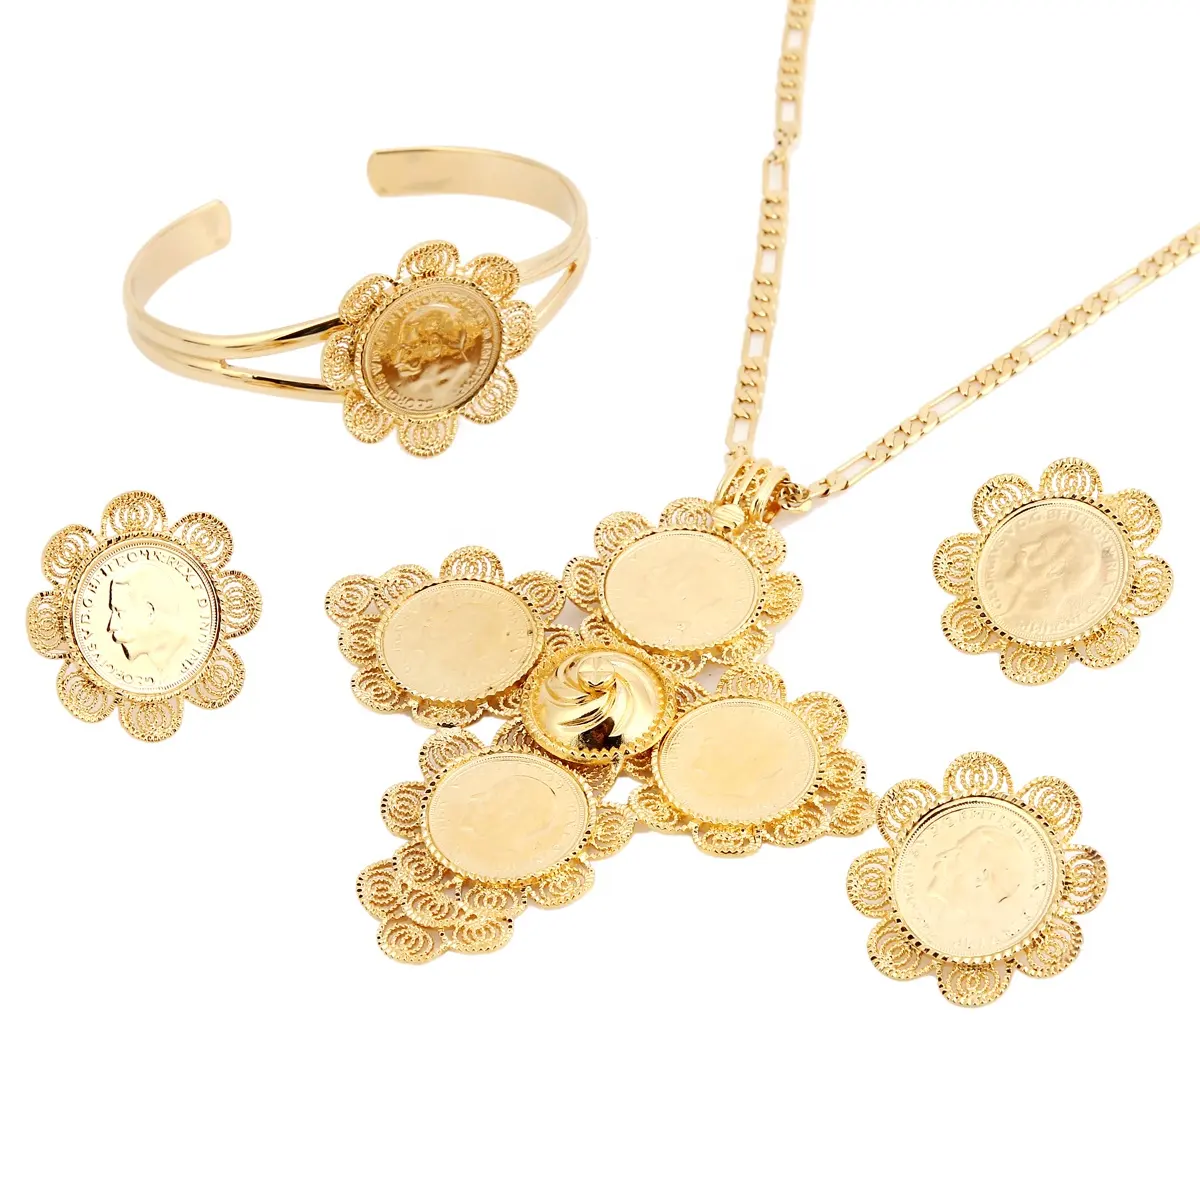 Traditional Ethiopian Coin Wedding Jewelry Sets Gold Color Bridal Romantic Jewelry